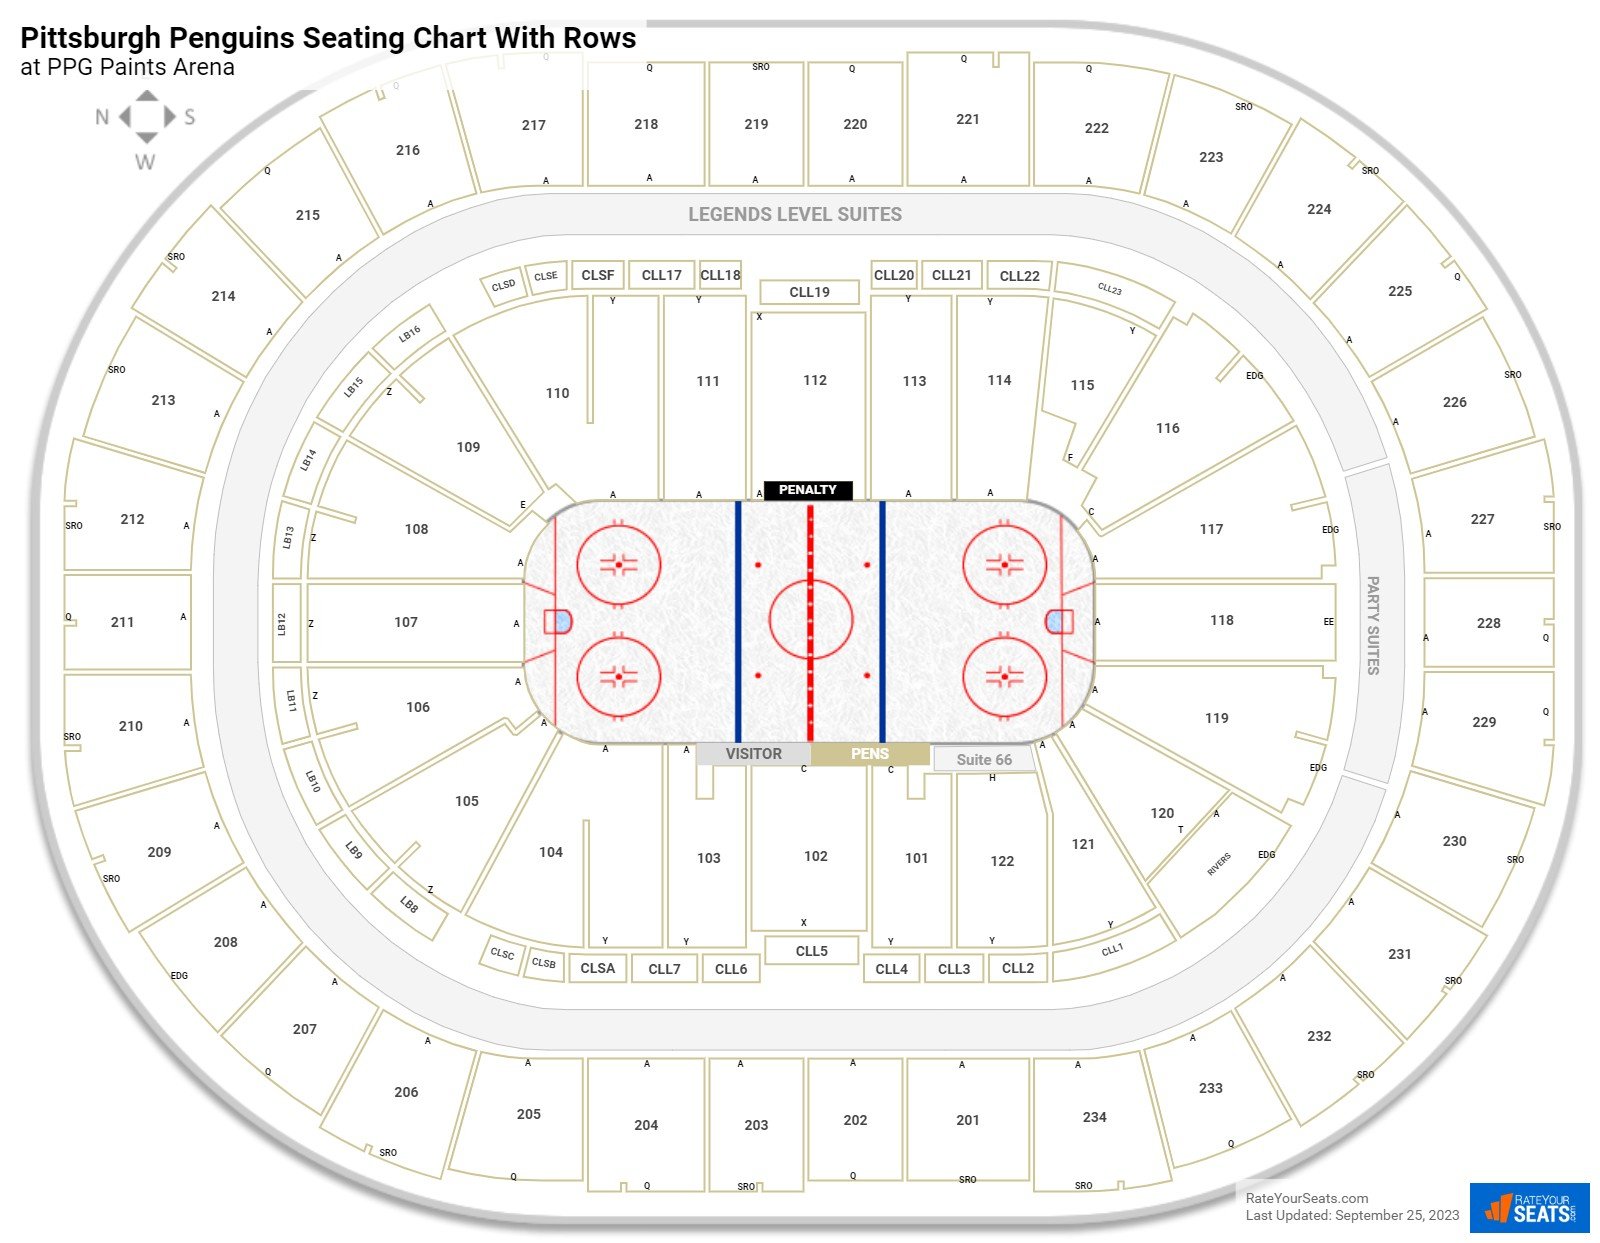 Pittsburgh Penguins Seating Charts At Ppg Paints Arena Rateyourseats Com.